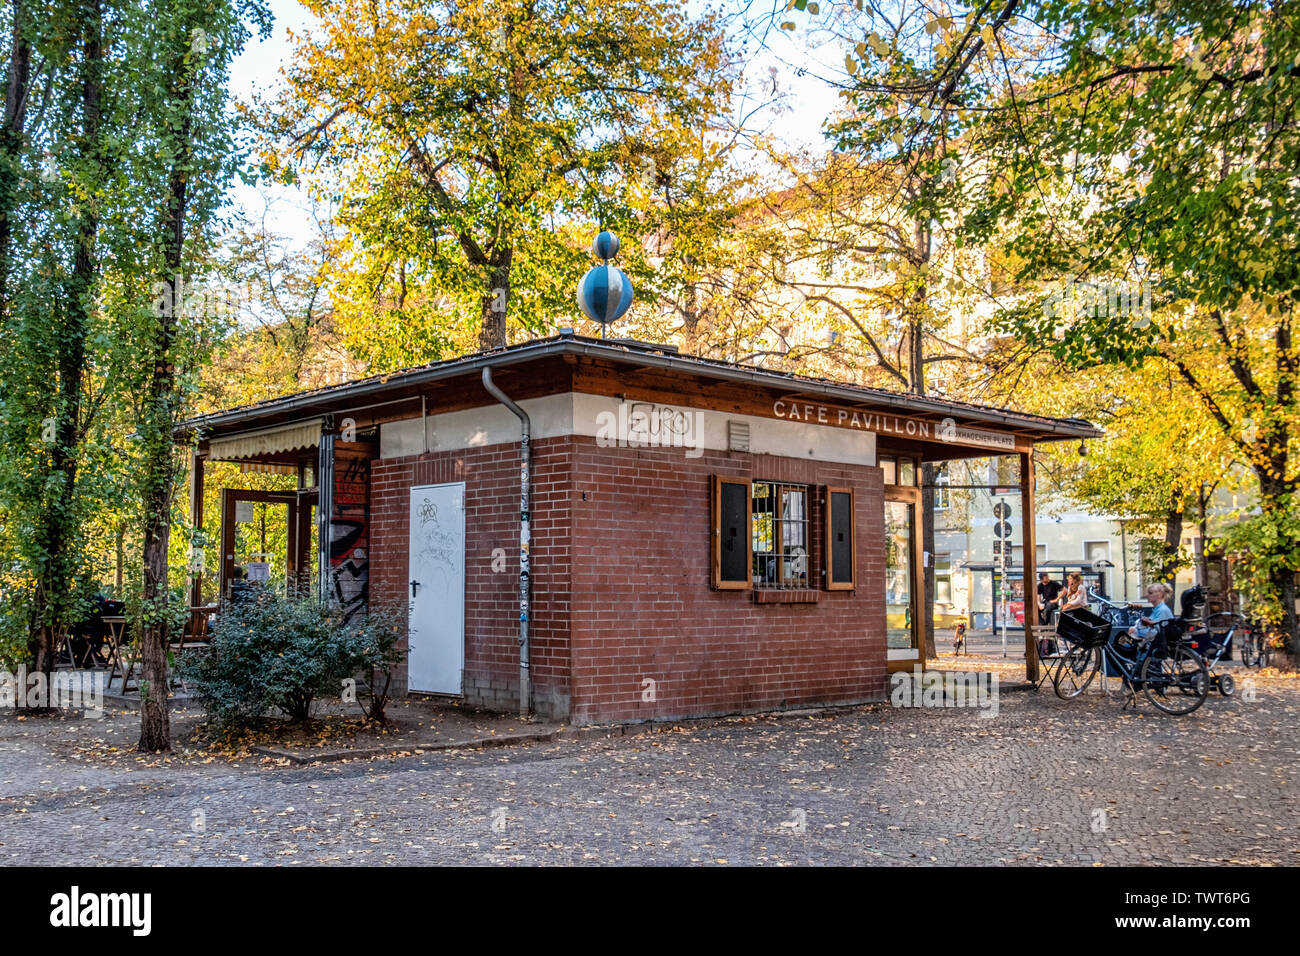 The Cafe Pavilion Is A Small Coffee Shop Offering Employment To Delinquent Young People And Youth With Addiction Problems In Friedrichshain Berlin Stock Photo Alamy